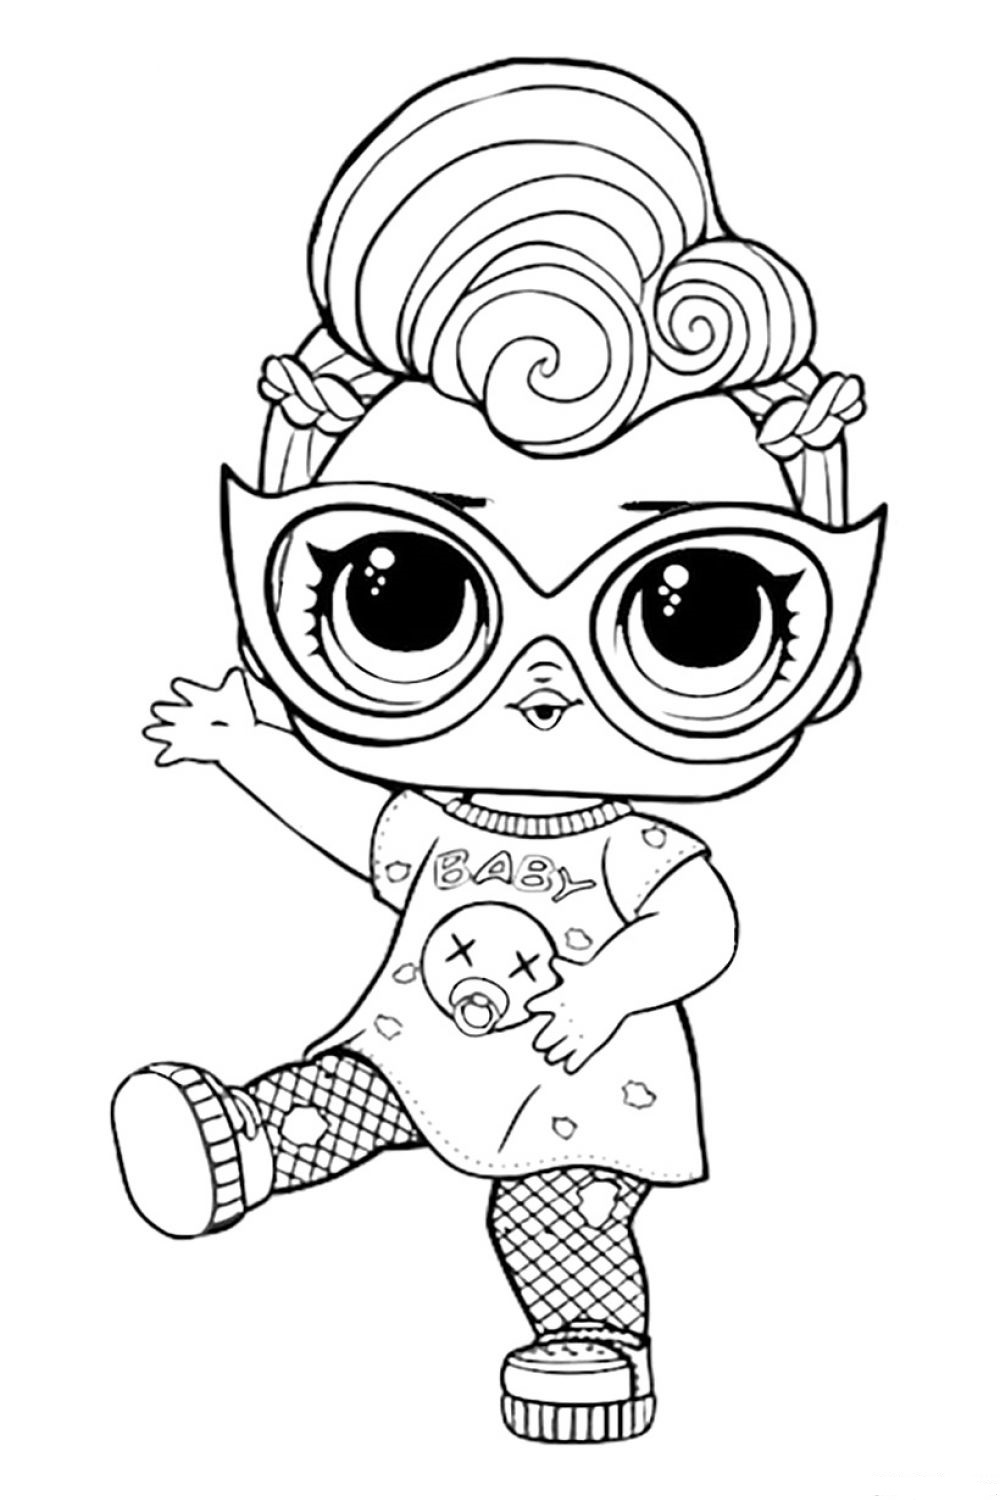 LOL Coloring Pages FREE Printable 4